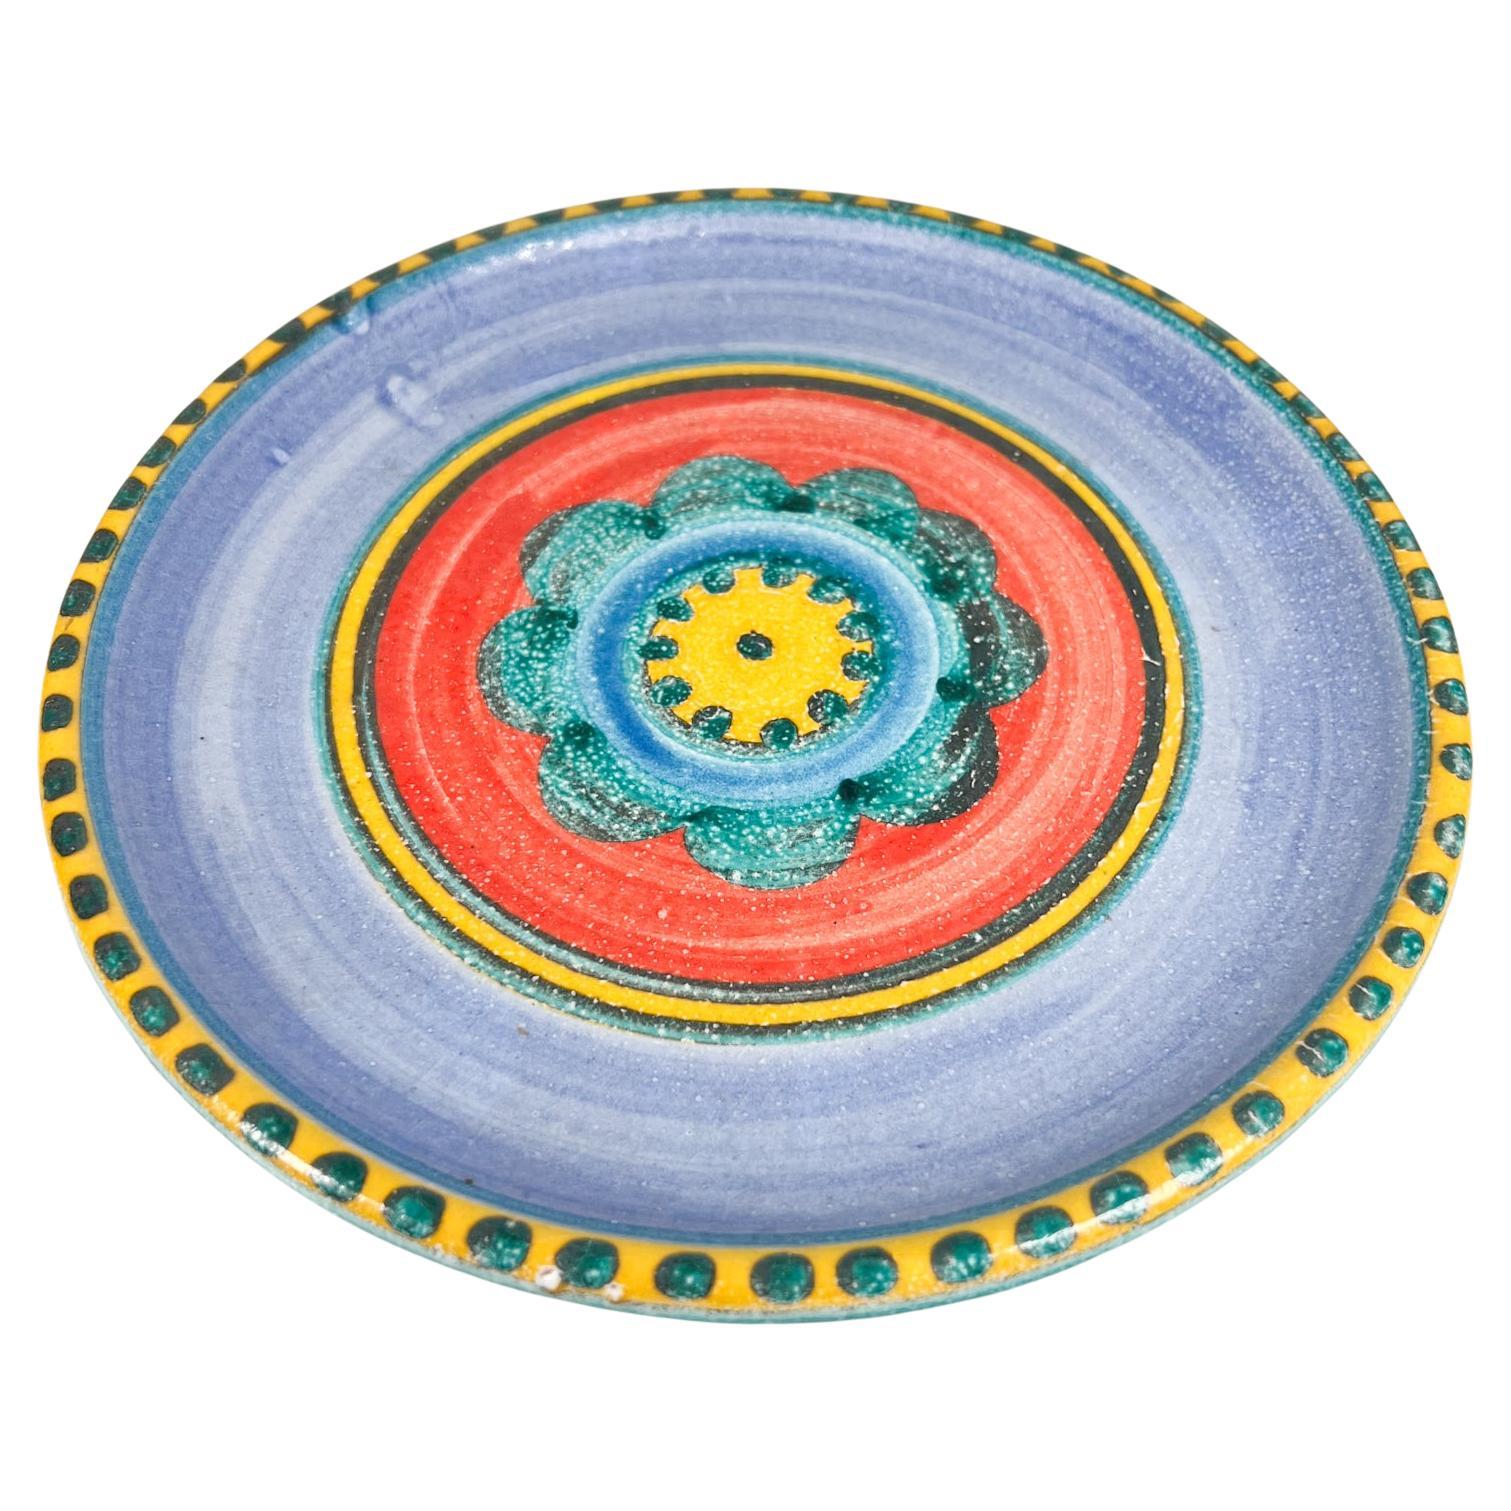 1960s, DeSimone Pottery of Italy Colorful Ceramic Art Plate Hand Painted Flower